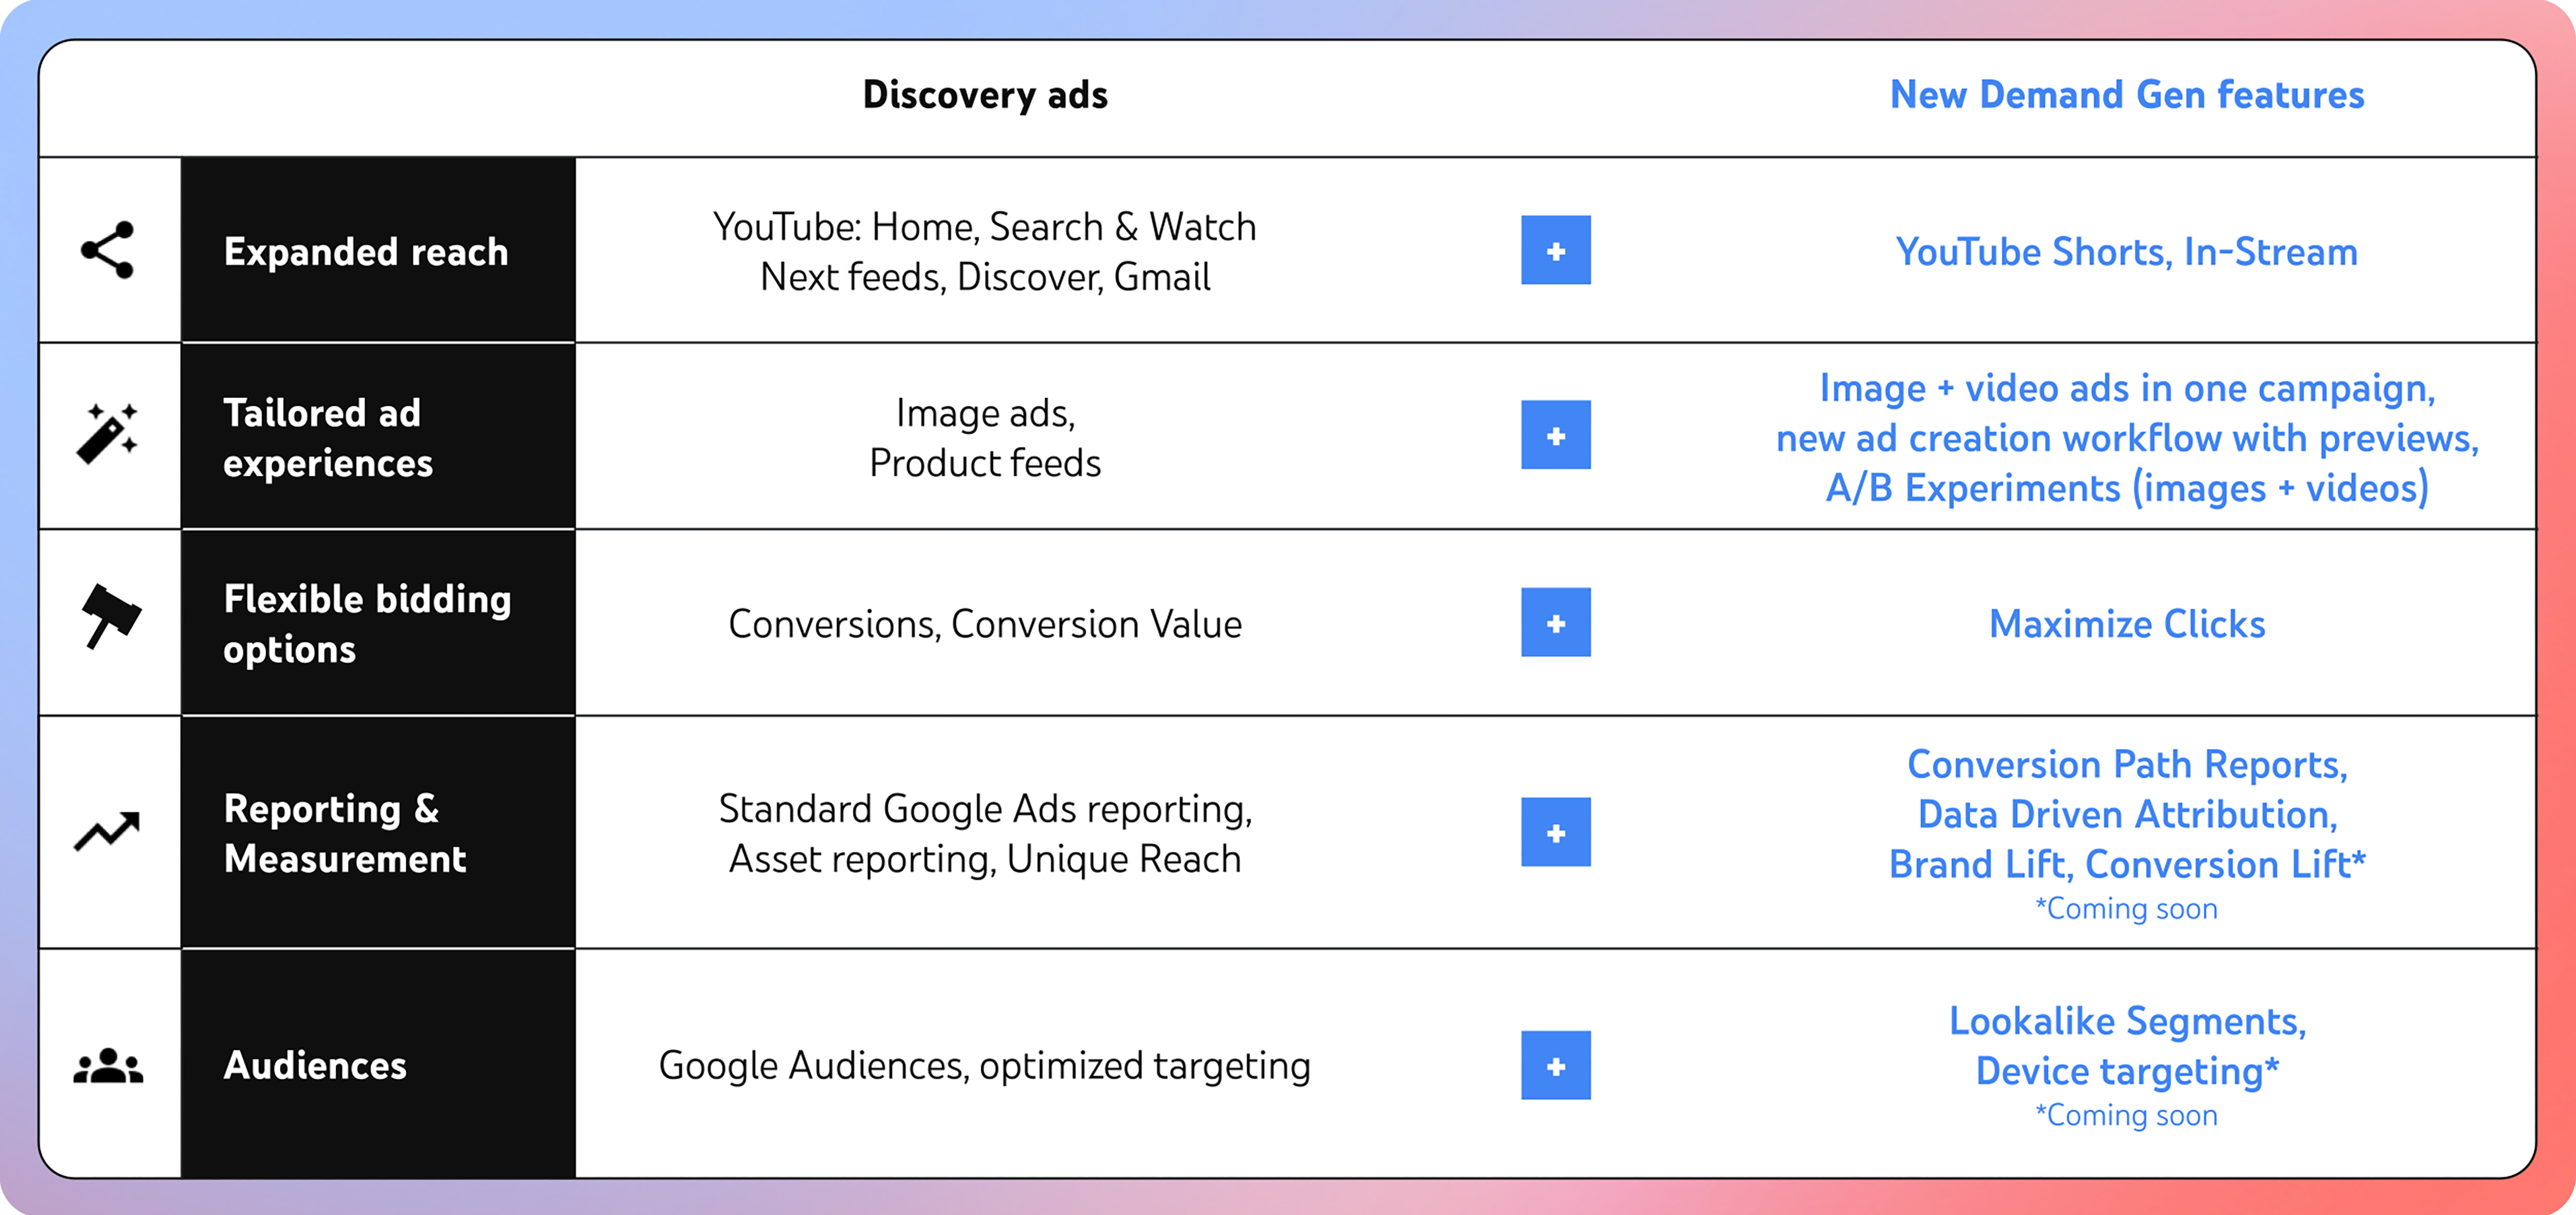 Differences between Demand Gen and Discovery Ads campaigns in Google Ads